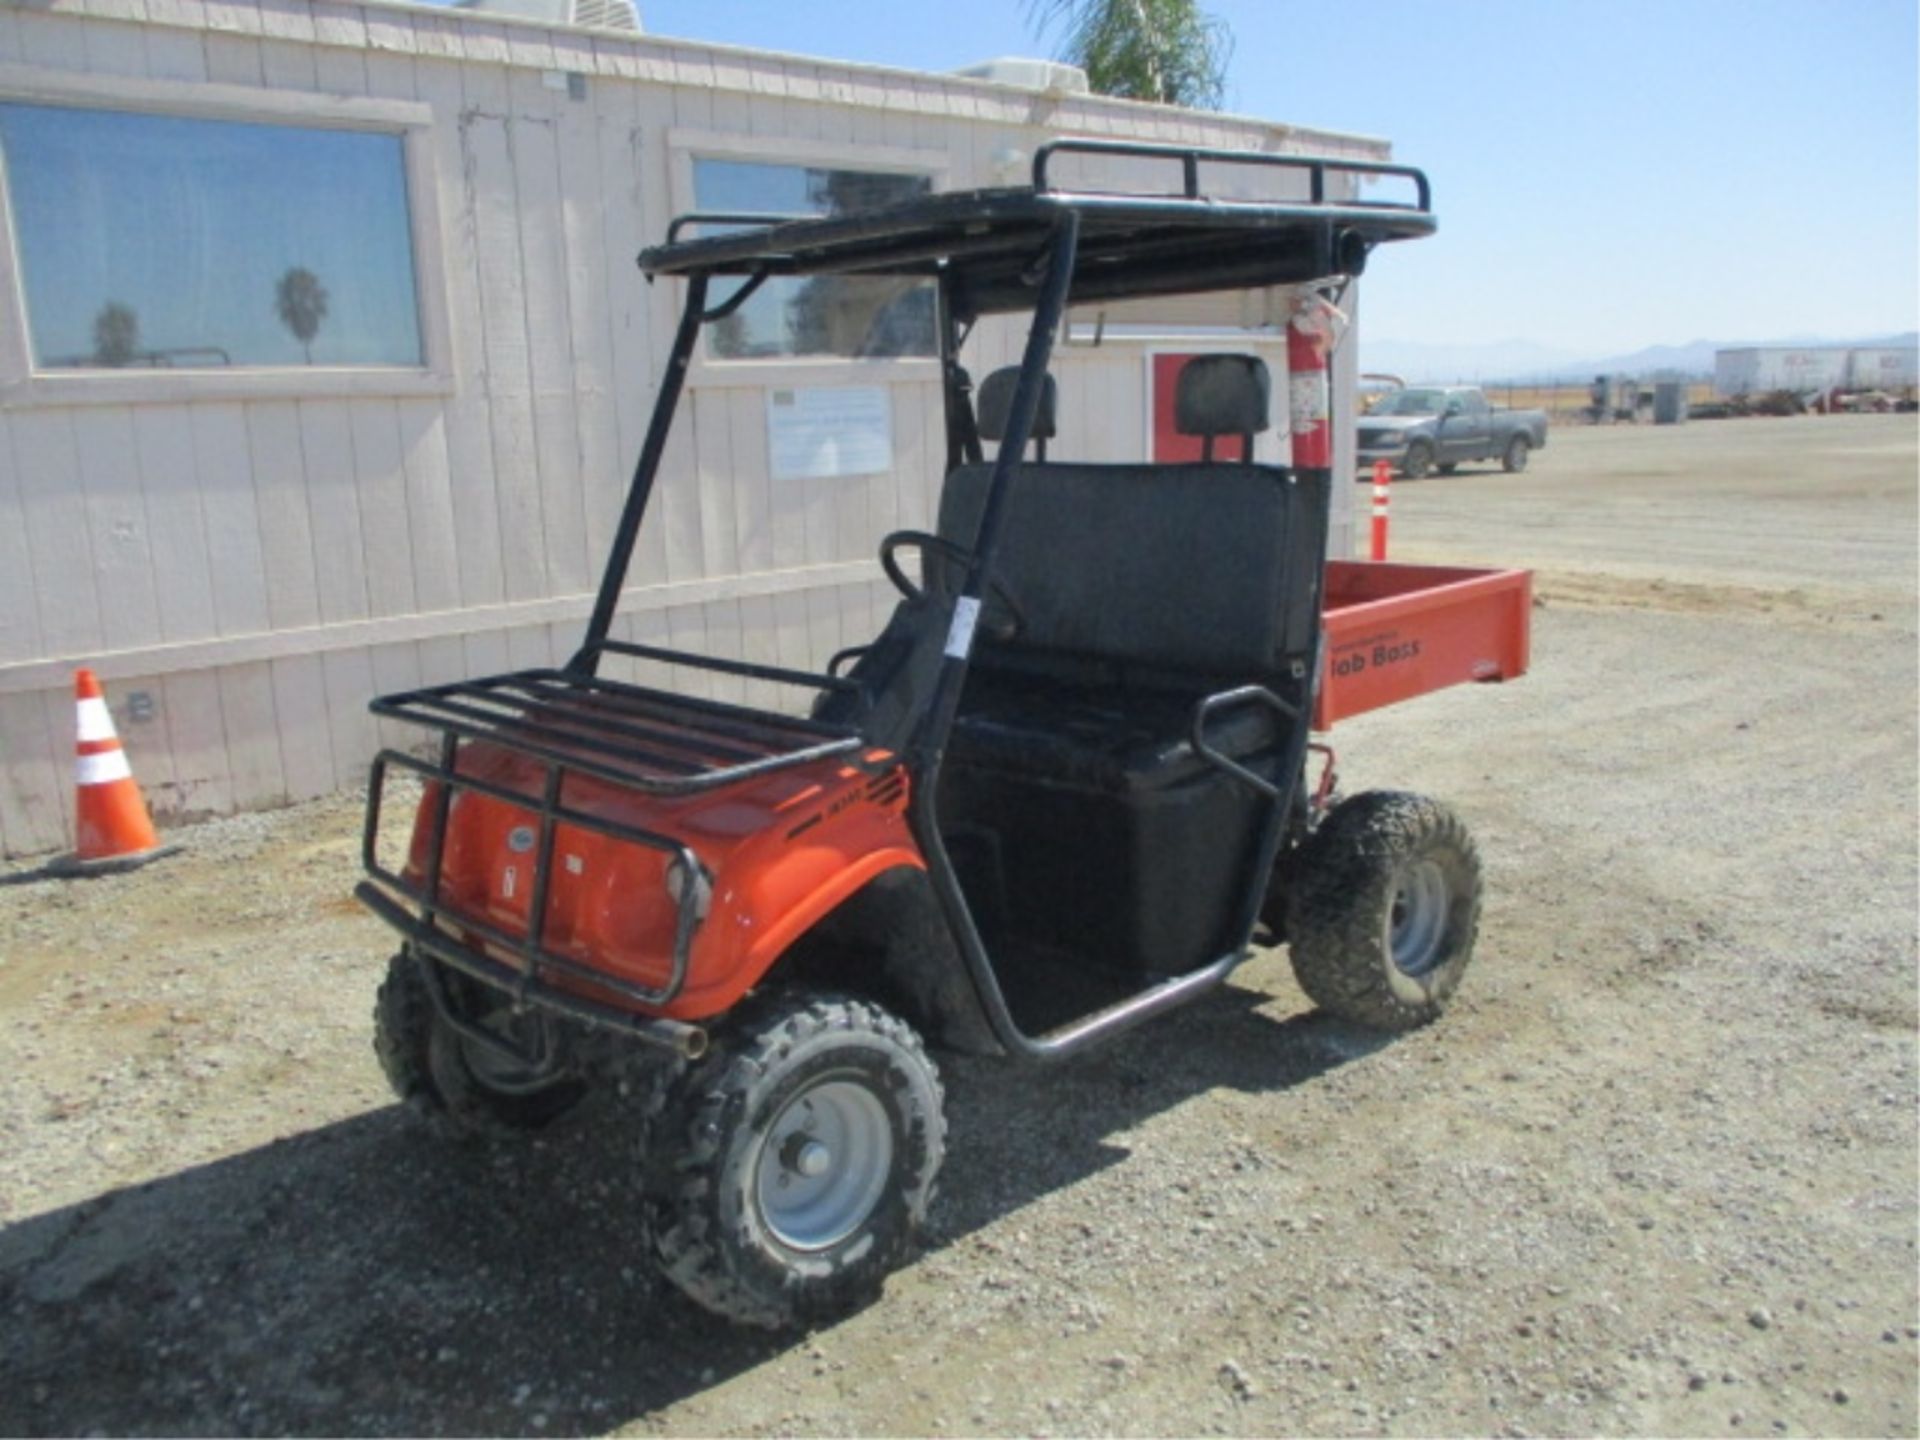 2008 American Sportworks Job Boss Utility Cart, Honda Gas, Rear Metal Dump Bed, Canopy, Tow Hitch, - Image 5 of 50